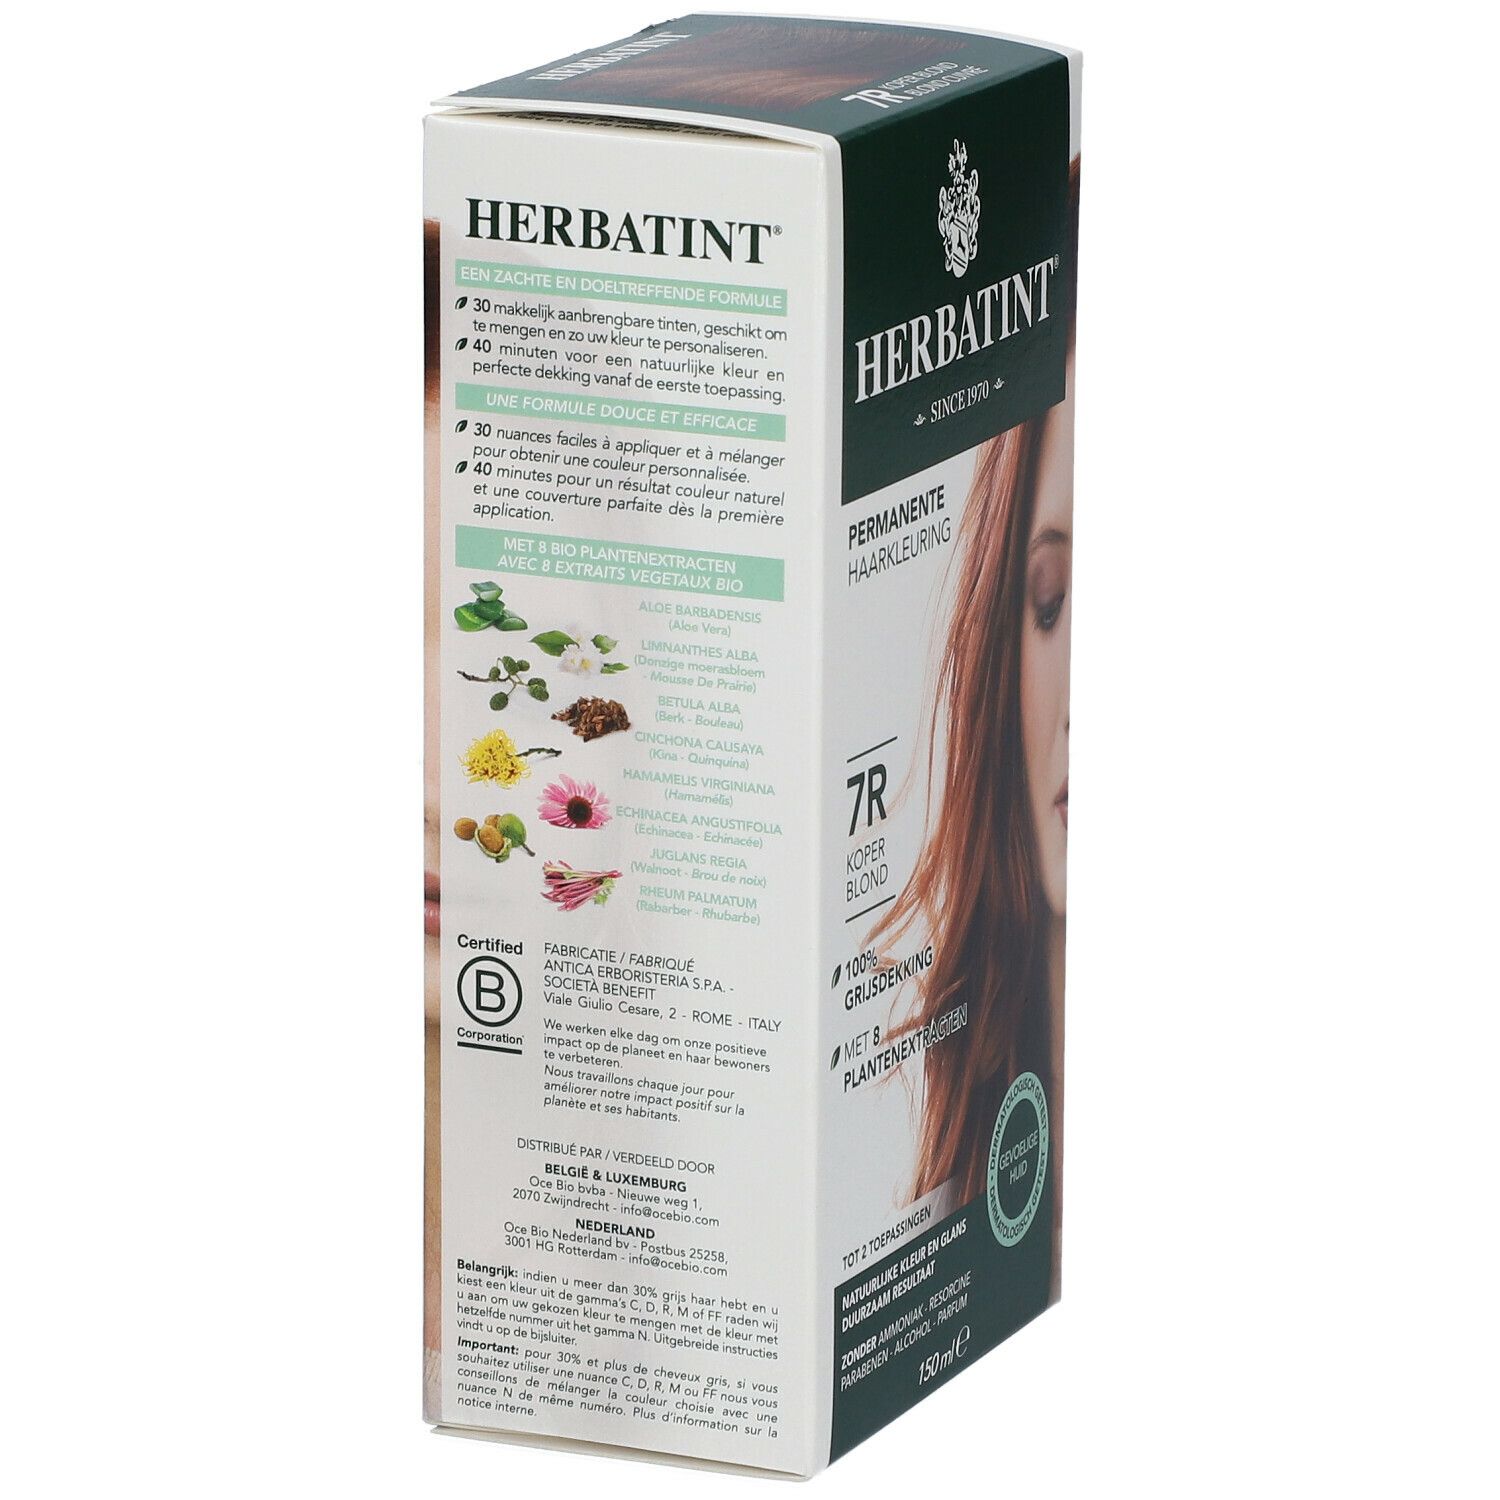 Herbatint Soin colorant permanent Blond Cuivre 7R